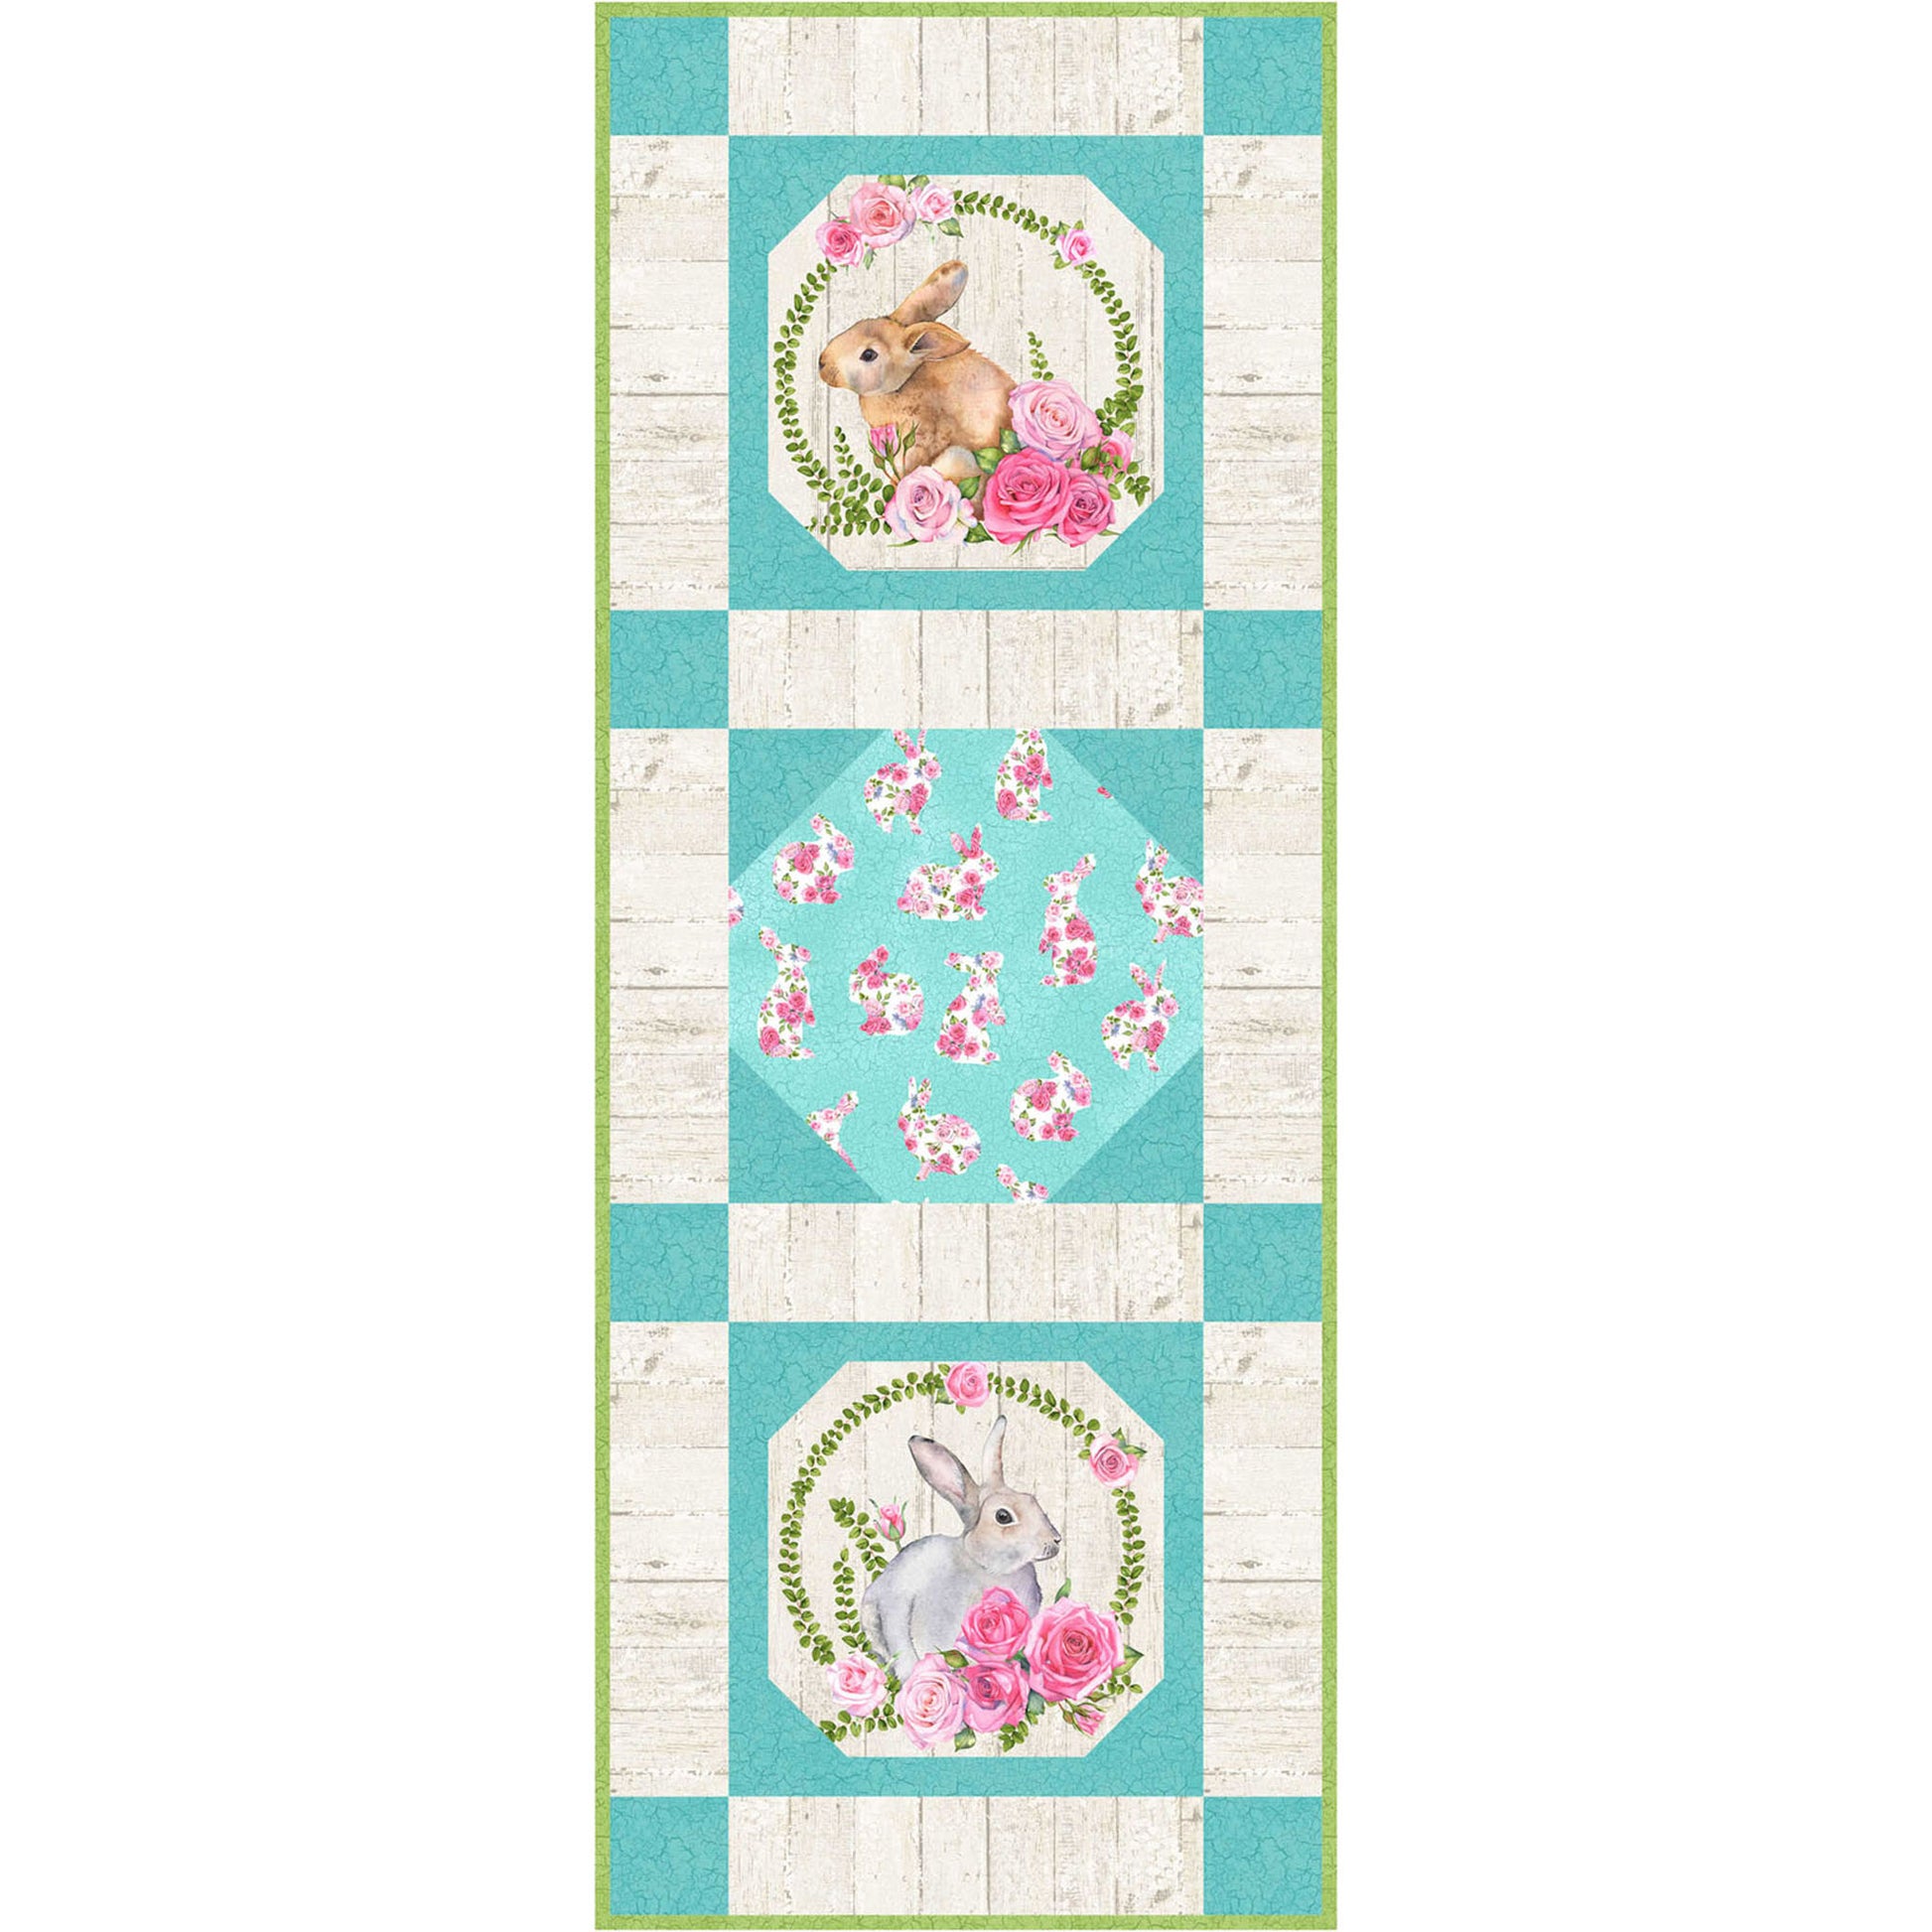 Turquoise and white quilted table runner with bunny and flowers design.